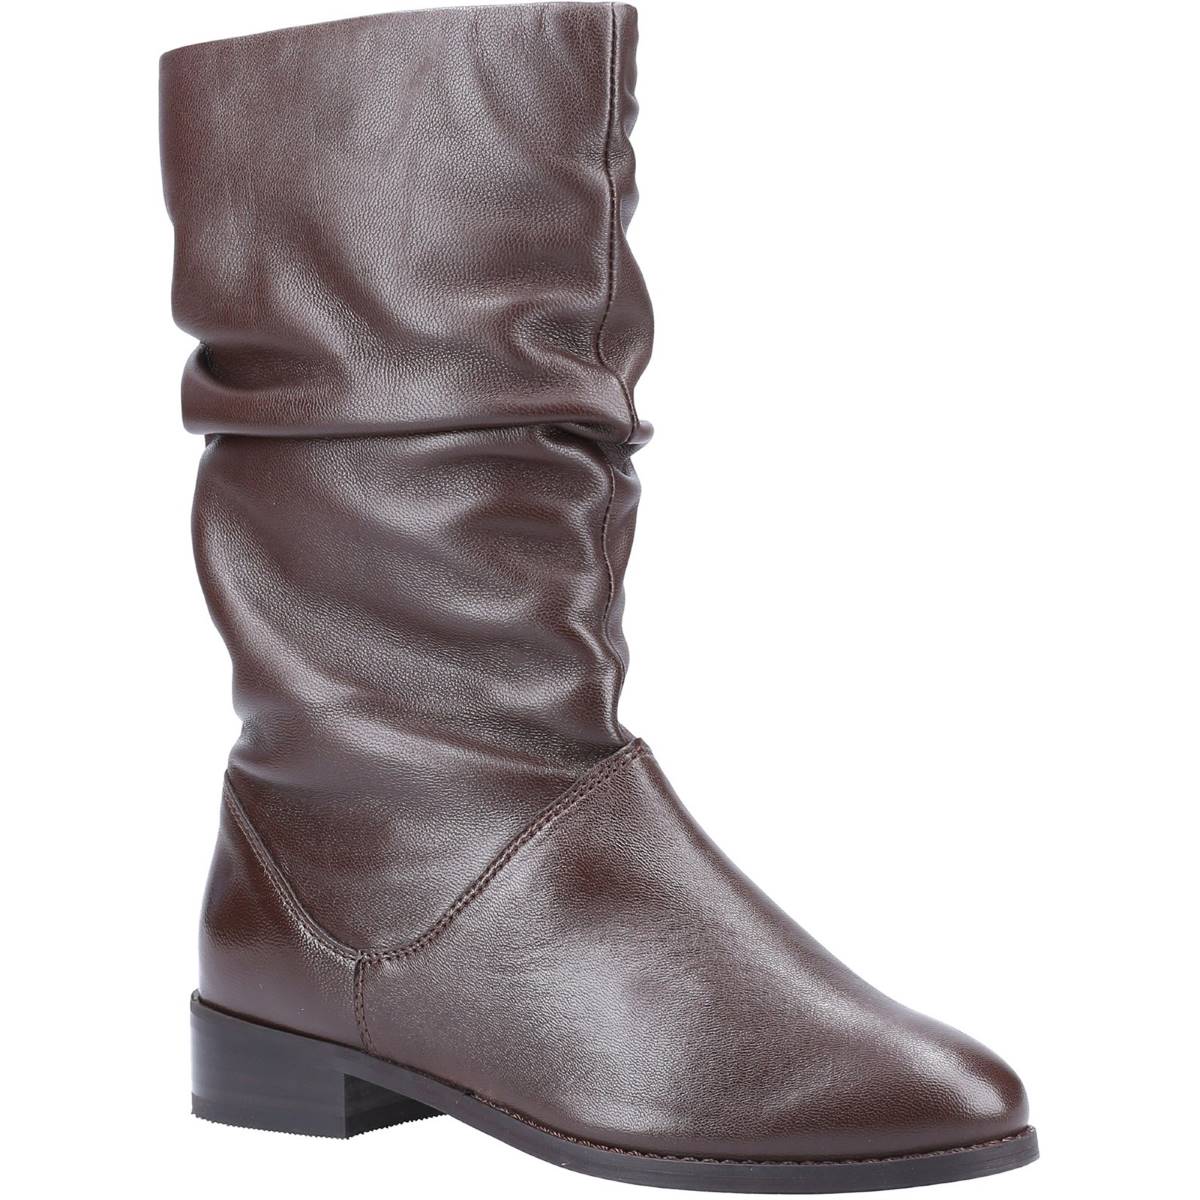 Dune London Rosalindas Brown Womens ankle boots 73508510005509 in a Plain Leather in Size 6